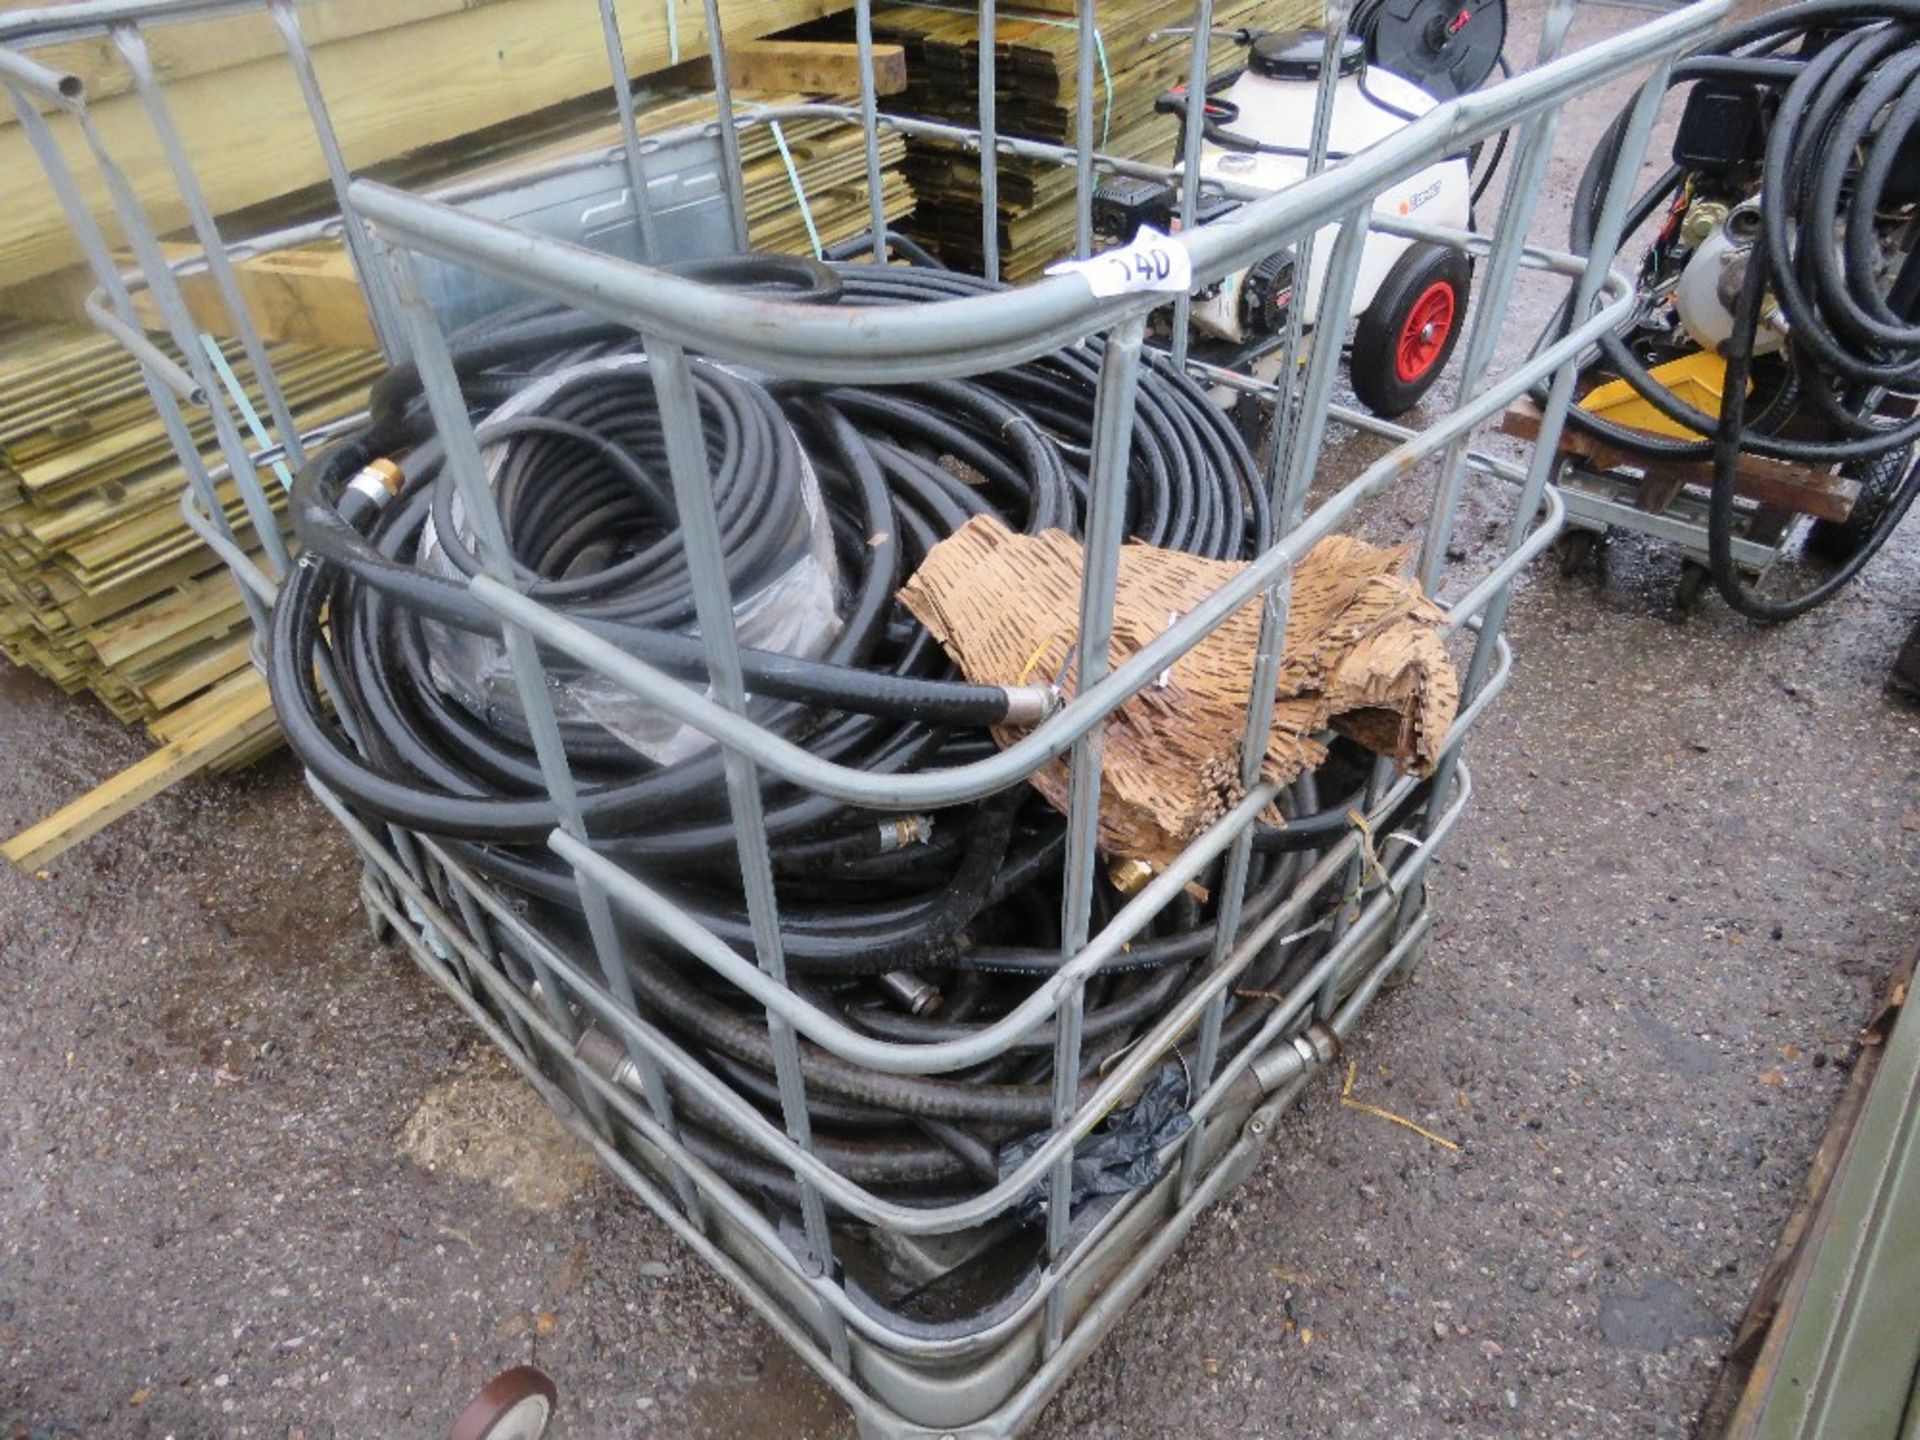 LARGE QUANTITY OF ASSORTED FUEL AND OTHER HOSES IN A STILLAGE. SOURCED FROM COMPANY LIQUIDATION.